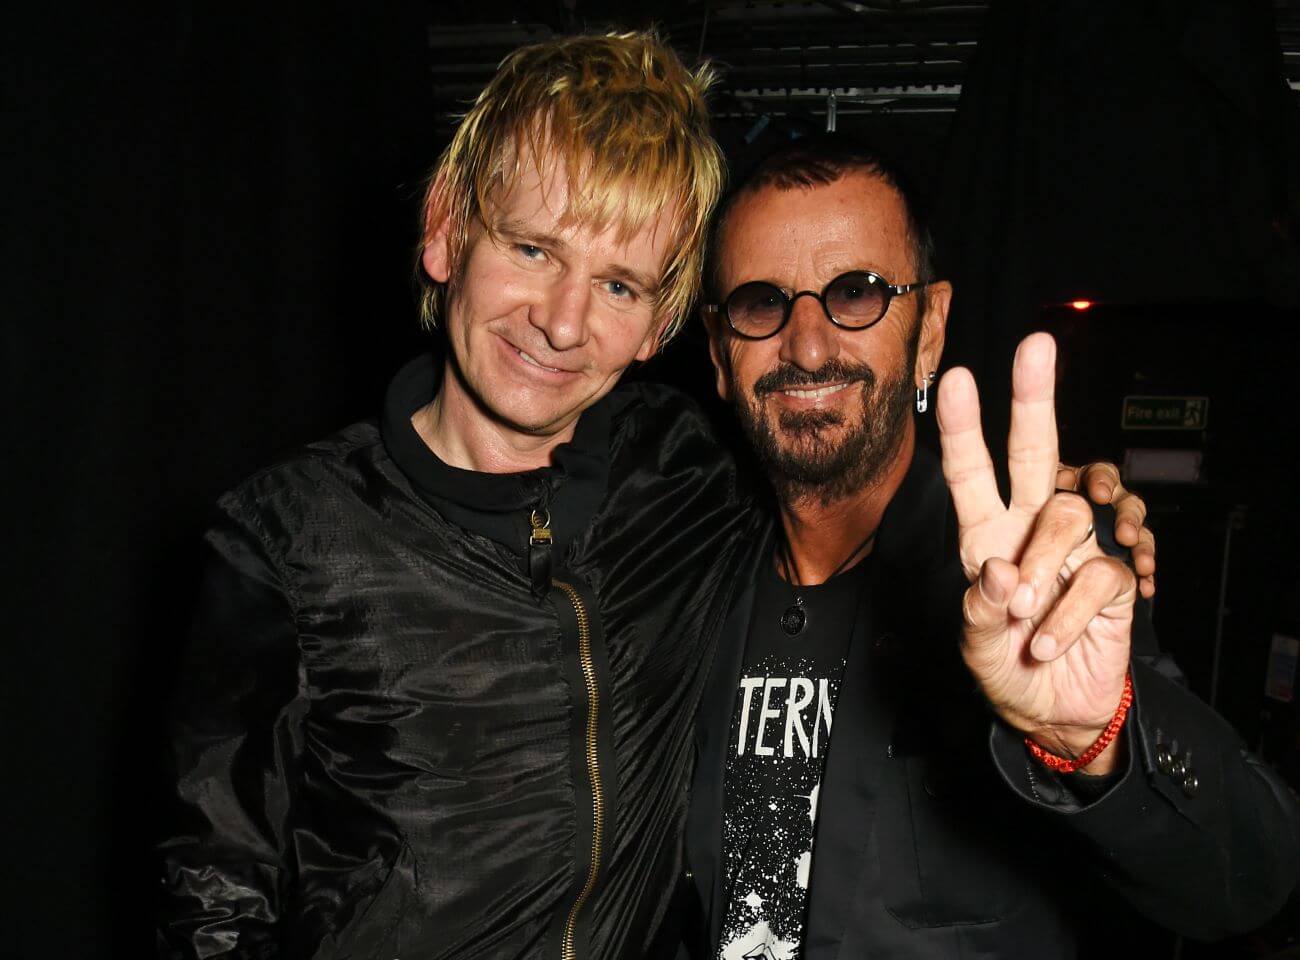 Zak Starkey stands with his arm around Ringo Starr's shoulders. Ringo Starr holds up a peace sign.